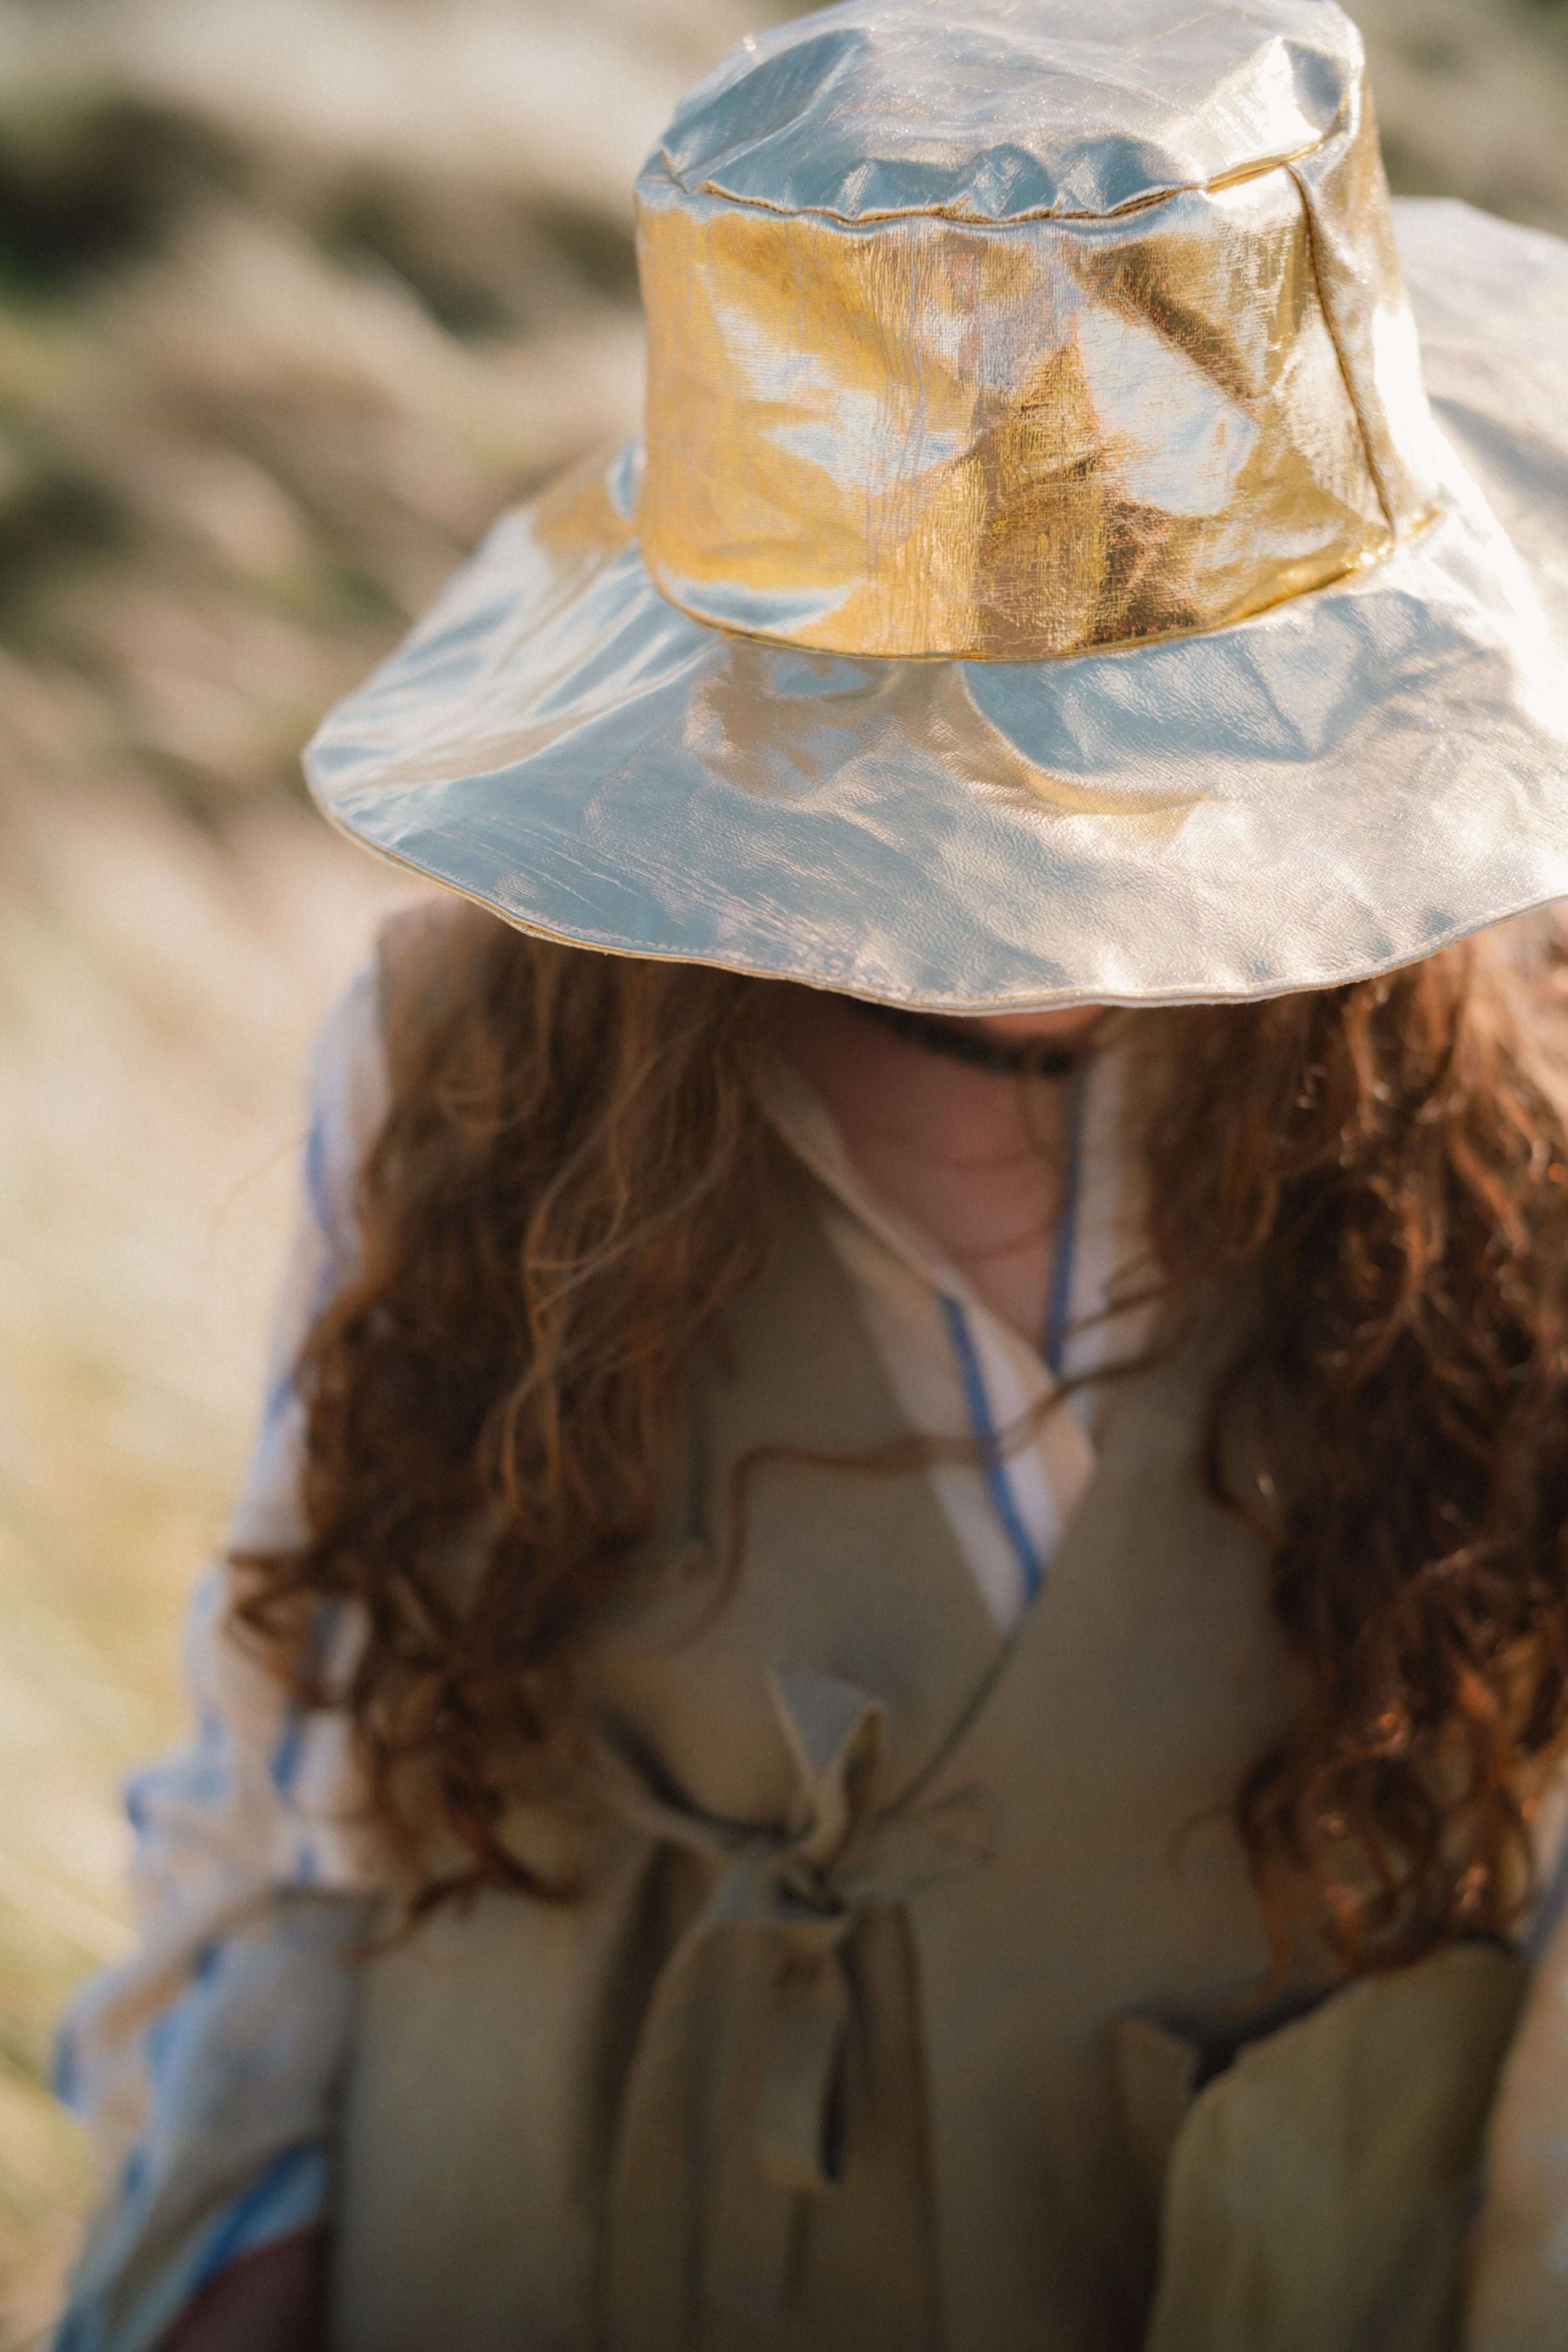 GOLD BEETLED SUN HAT | Inject some personality into any of your Summer looks with our Gold Beetled Sun hat. Created with our much loved Gold beetled linen. The hat features a wide brim that will shade you from the rays this Summer. This piece is made with